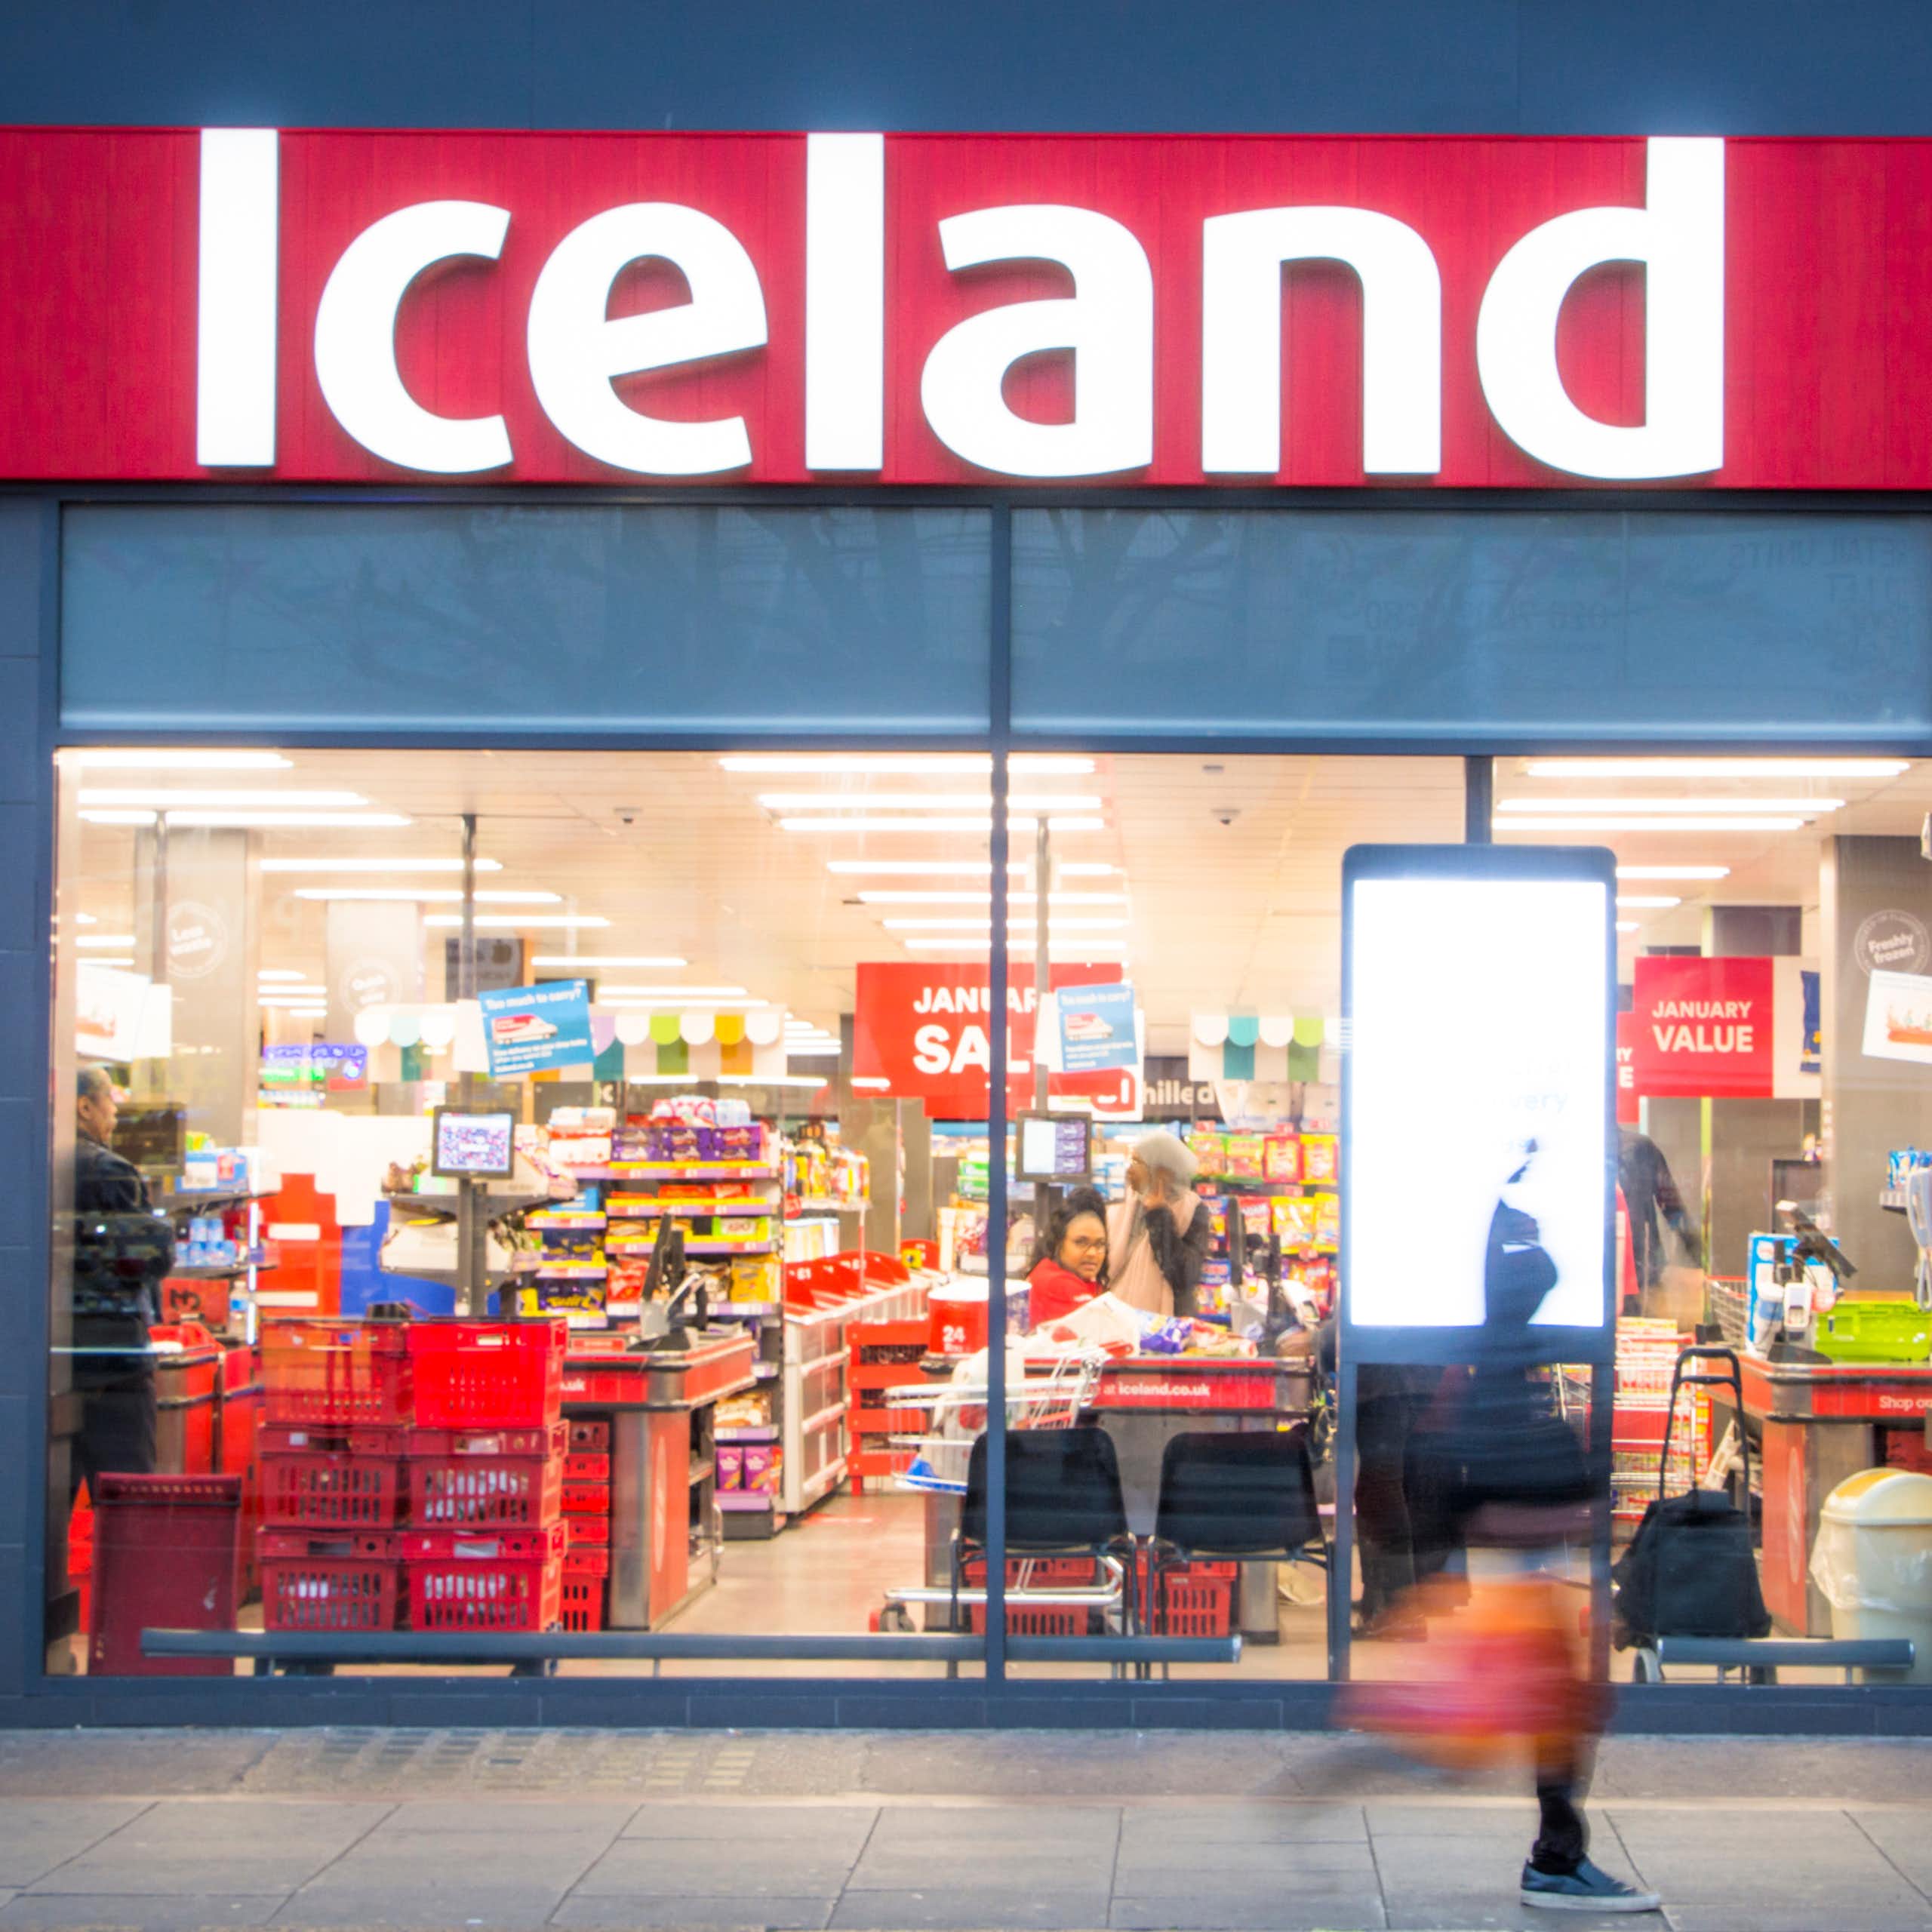 Supermarket Iceland is producing a manifesto on behalf of customers – but should retailers meddle in politics?